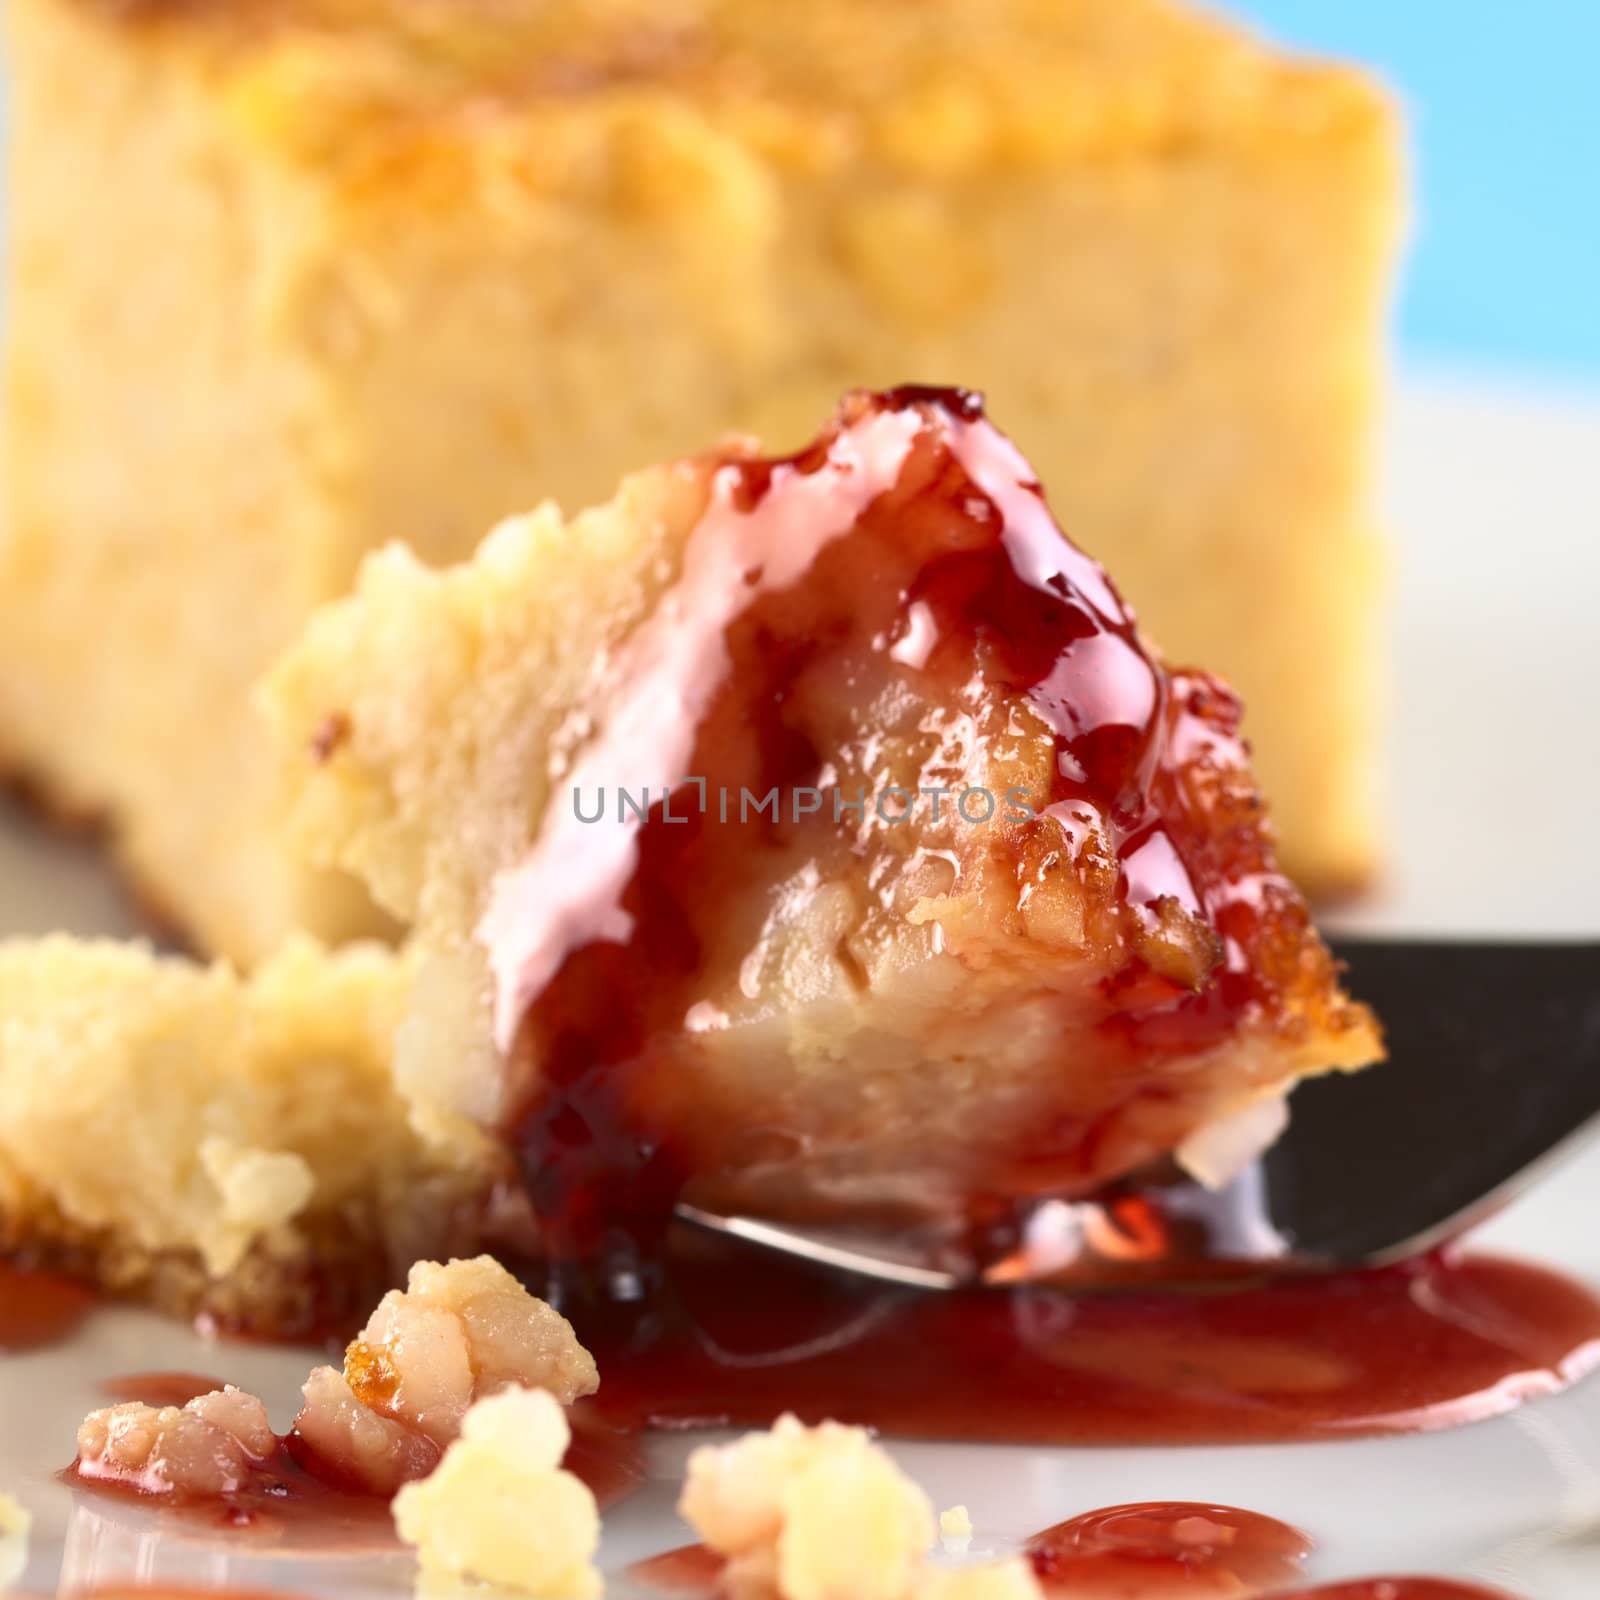 Strawberry Syrup on Baked Rice Pudding by ildi